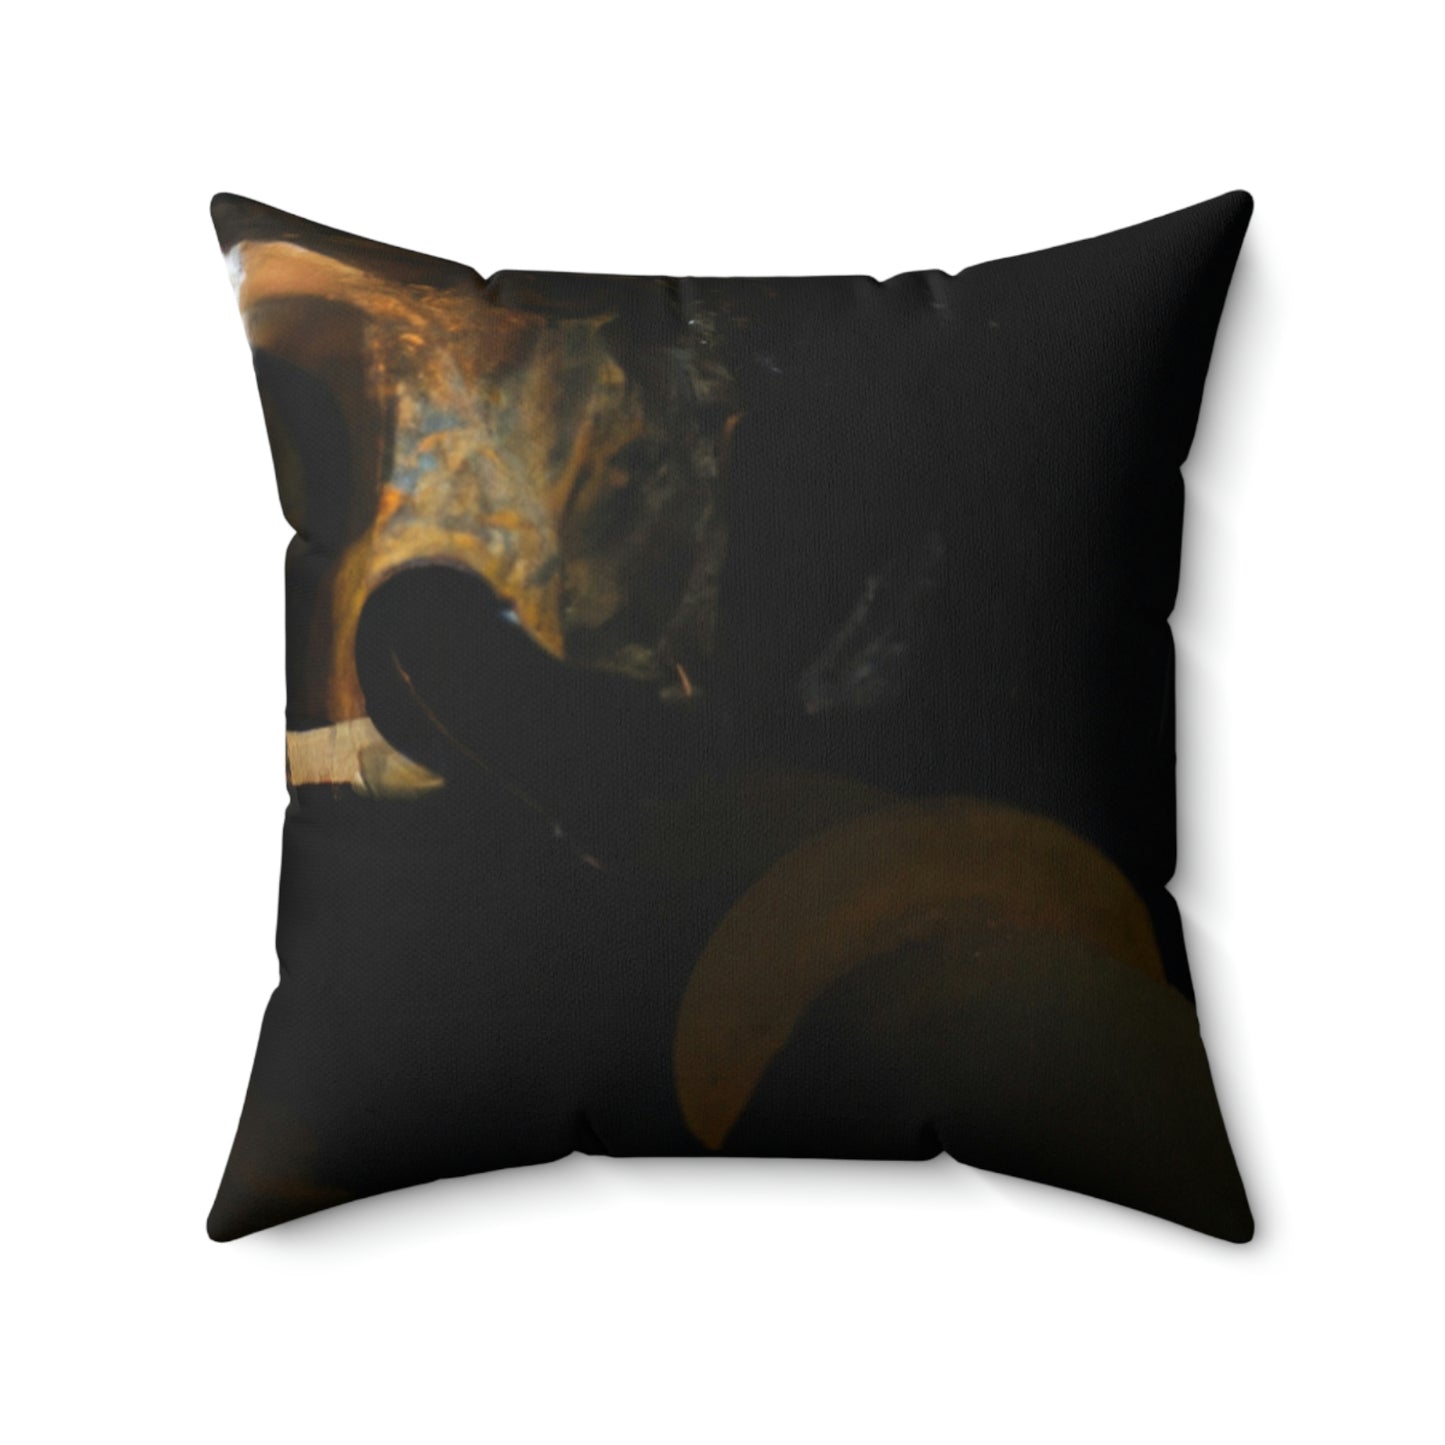 The Mysterious Subterranean Realm - The Alien Square Pillow